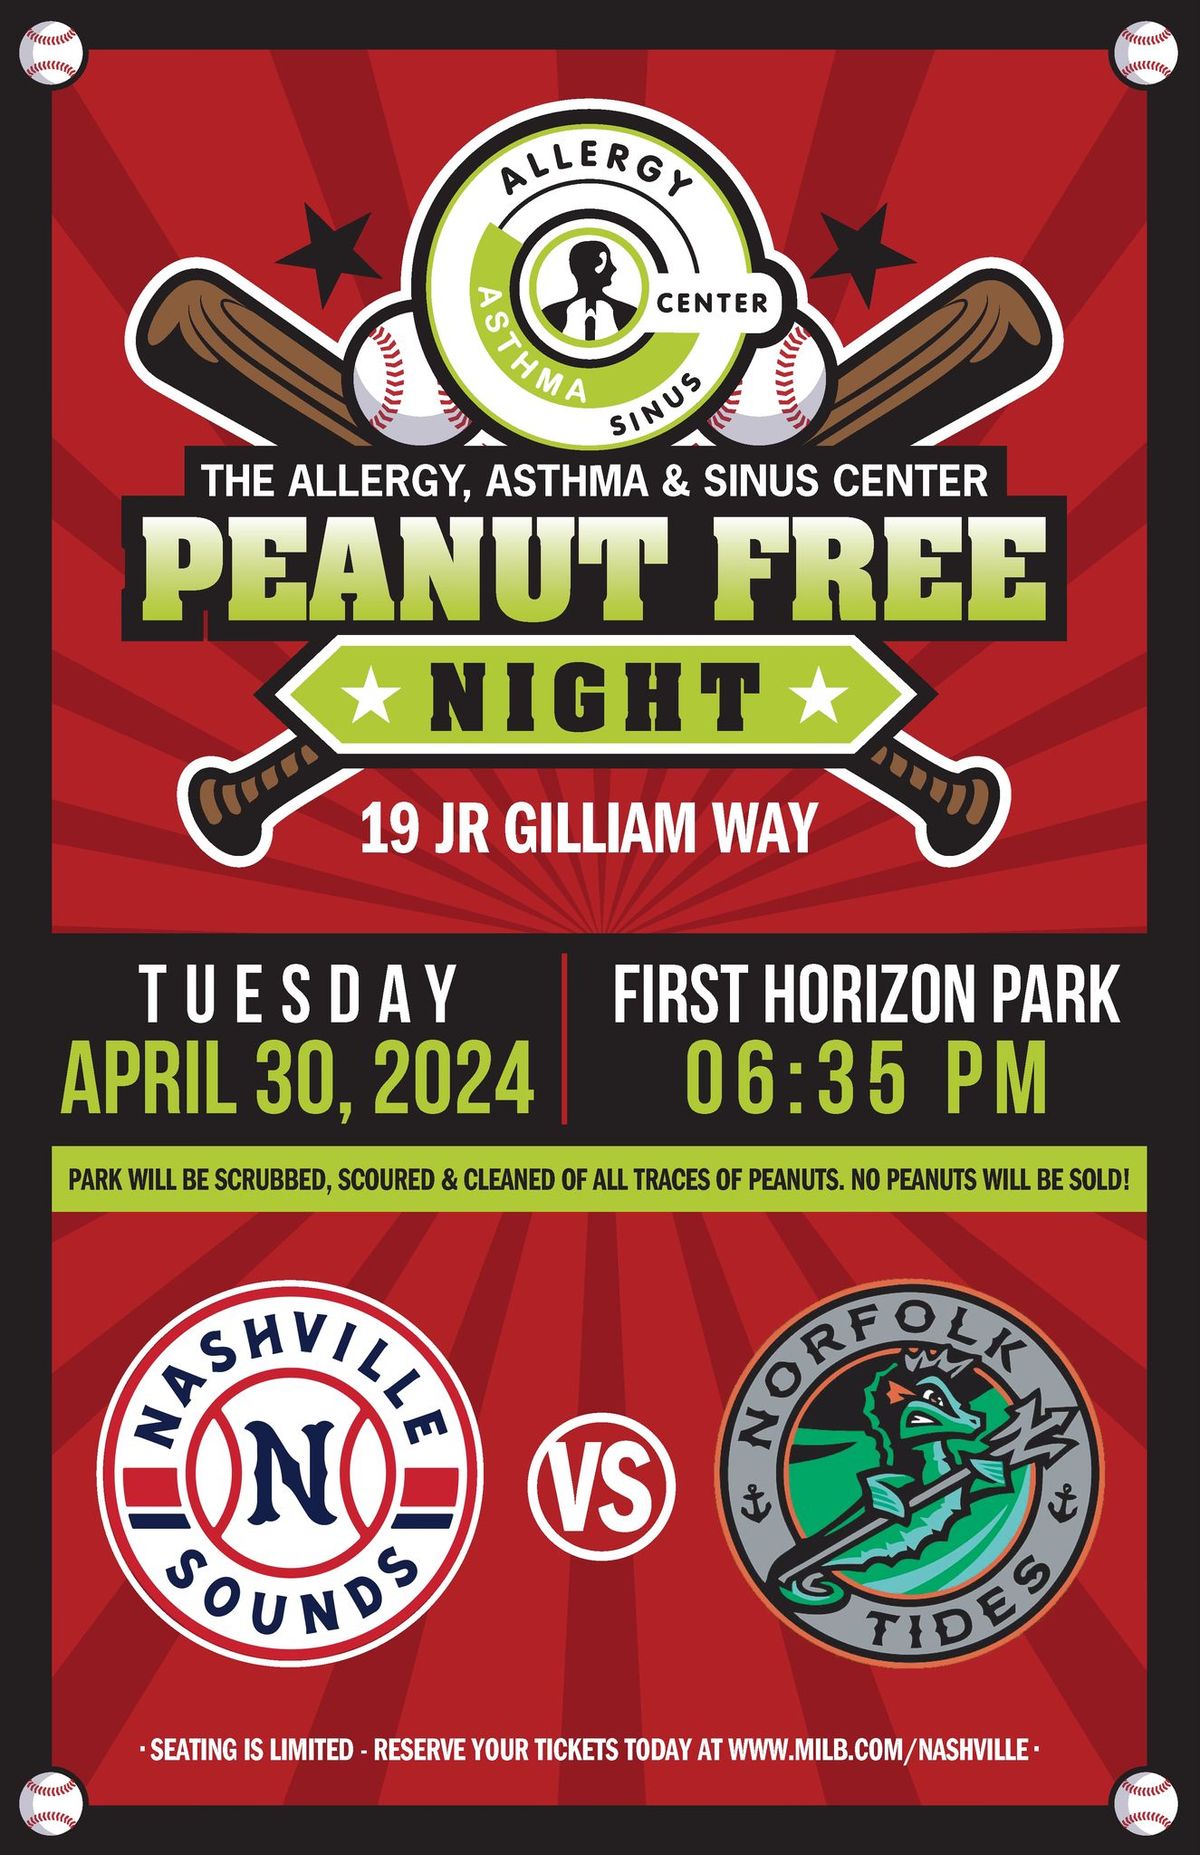 Peanut Free Night with the Nashville Sounds